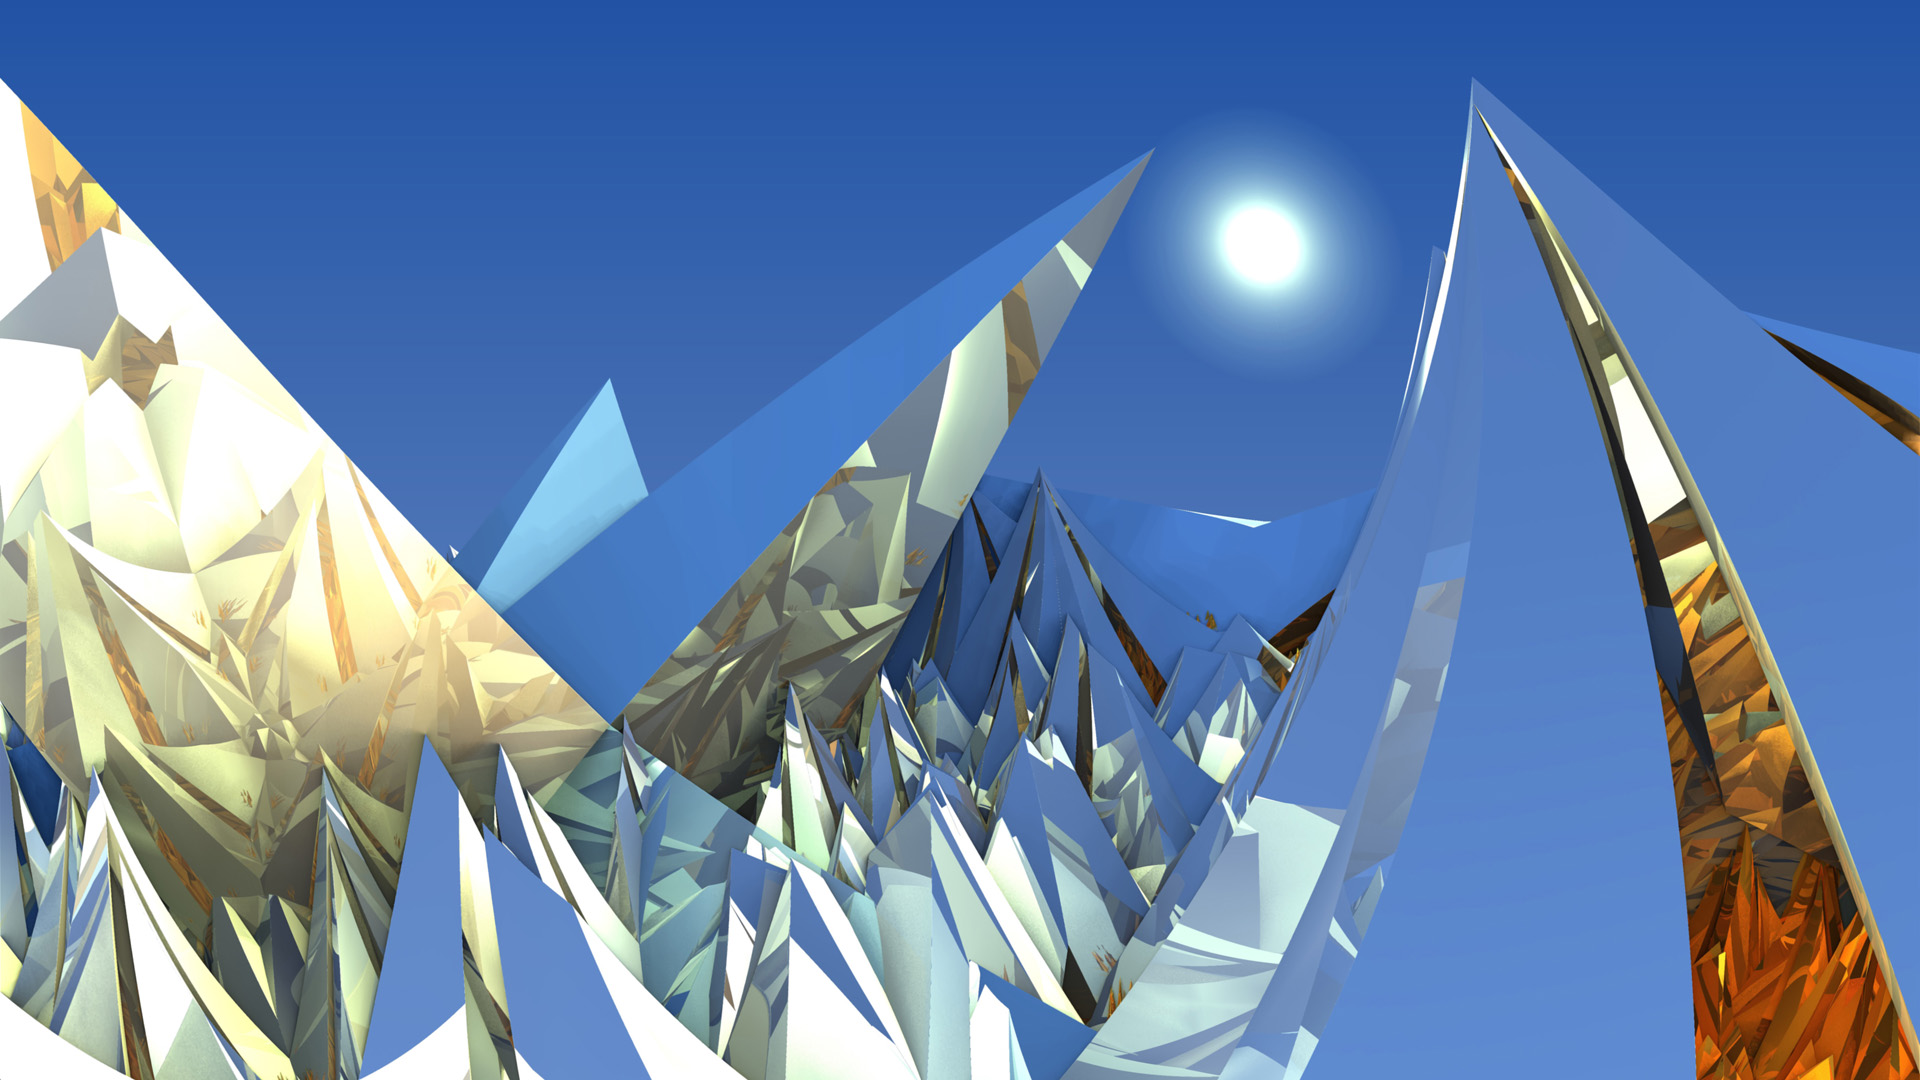 mandelbulb 3d, 3d, abstract, fractal, blue, cgi, geometry, reflection, spikes, white